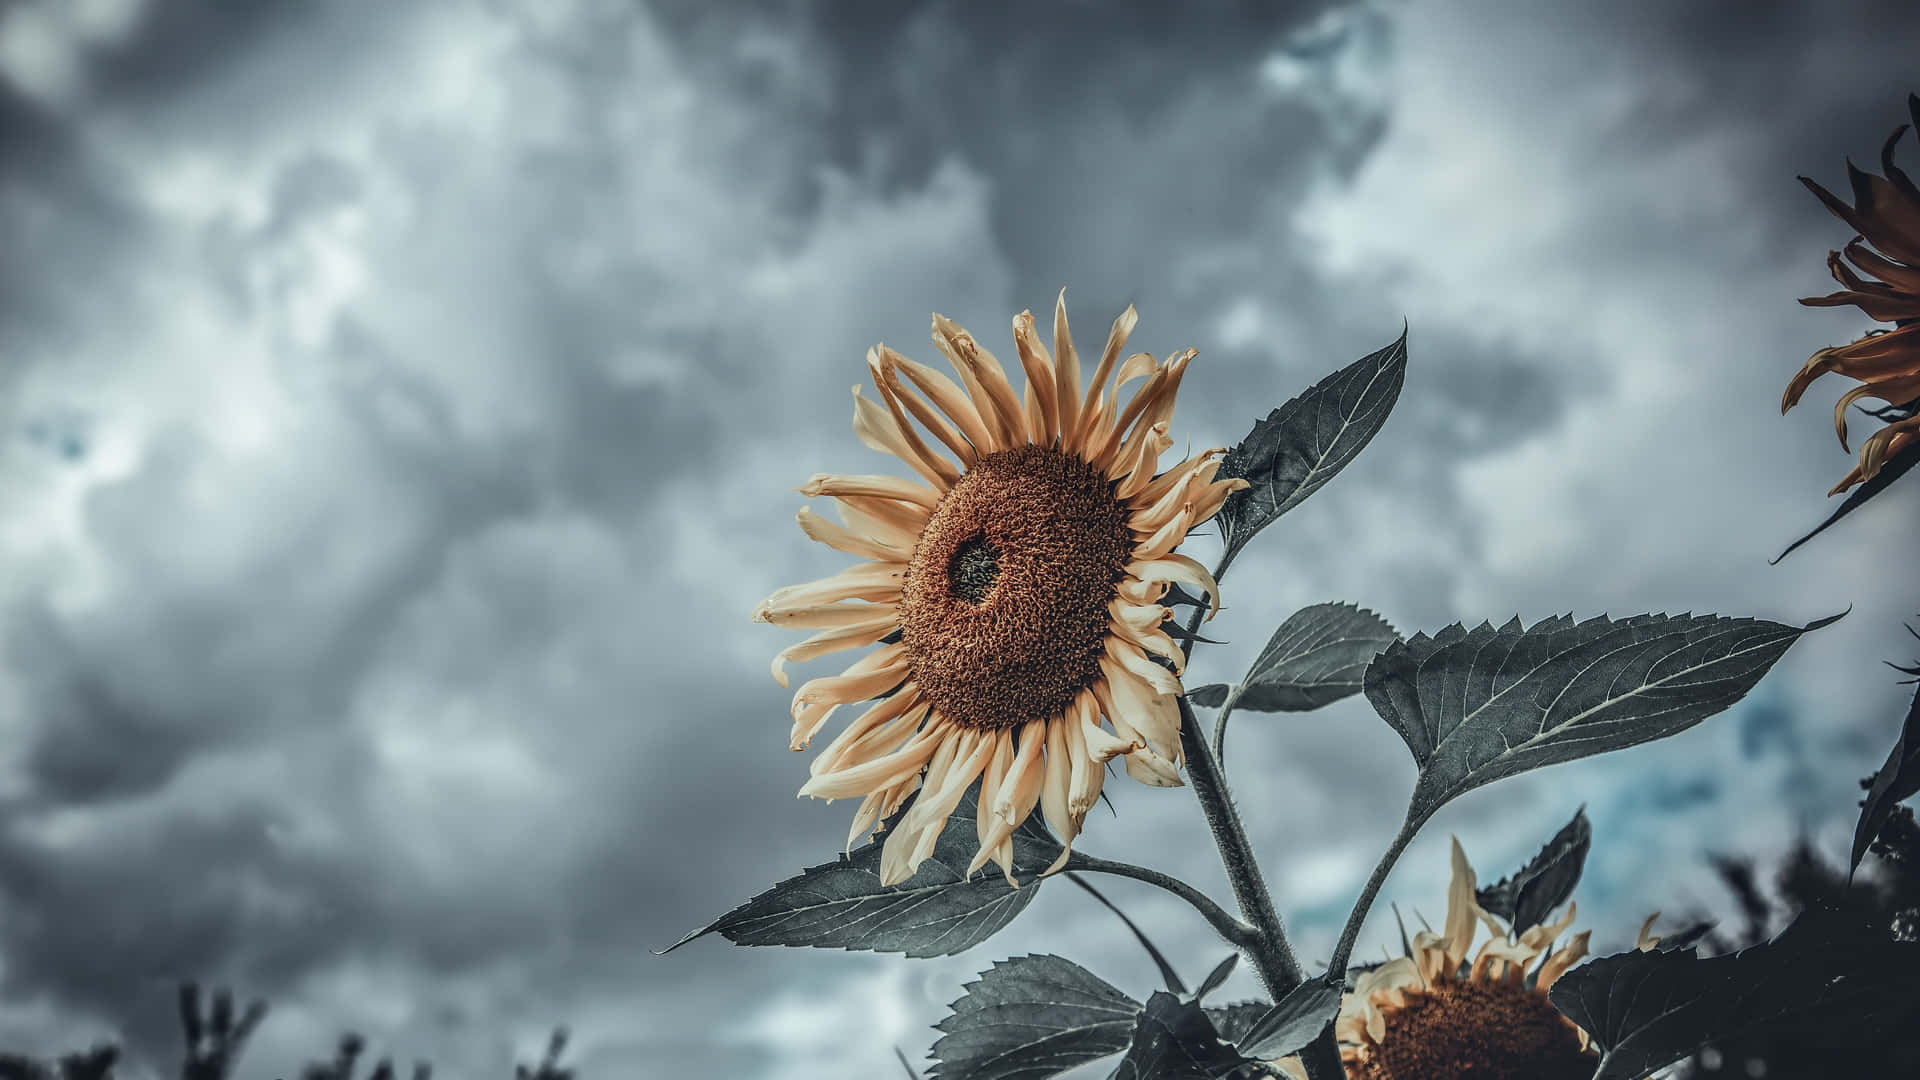 Sunflowers In The Field With A Cloudy Sky Wallpaper